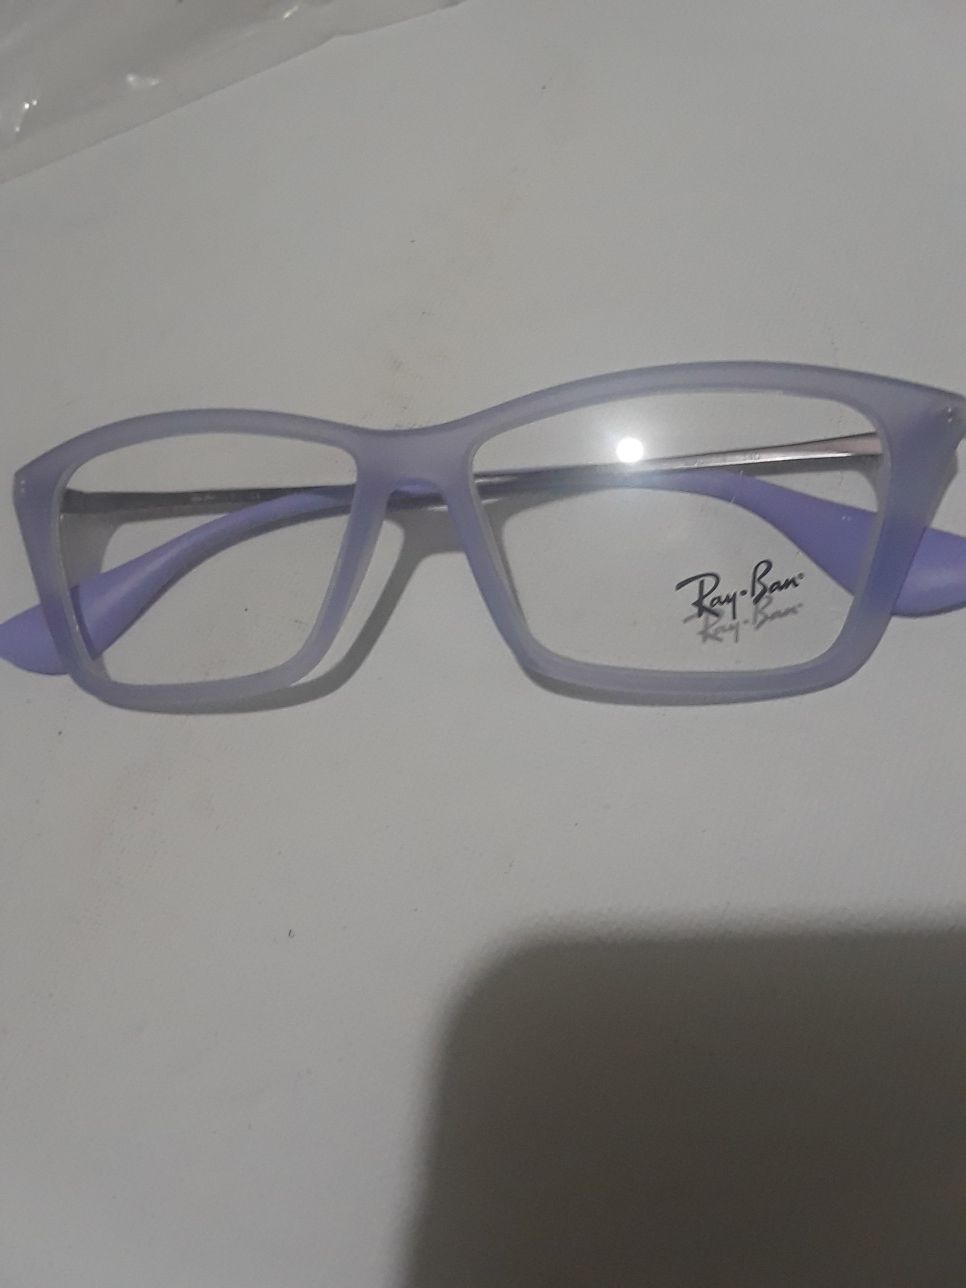 Violet Ray Ban eyeglasses Cateyes $50.00 cash only